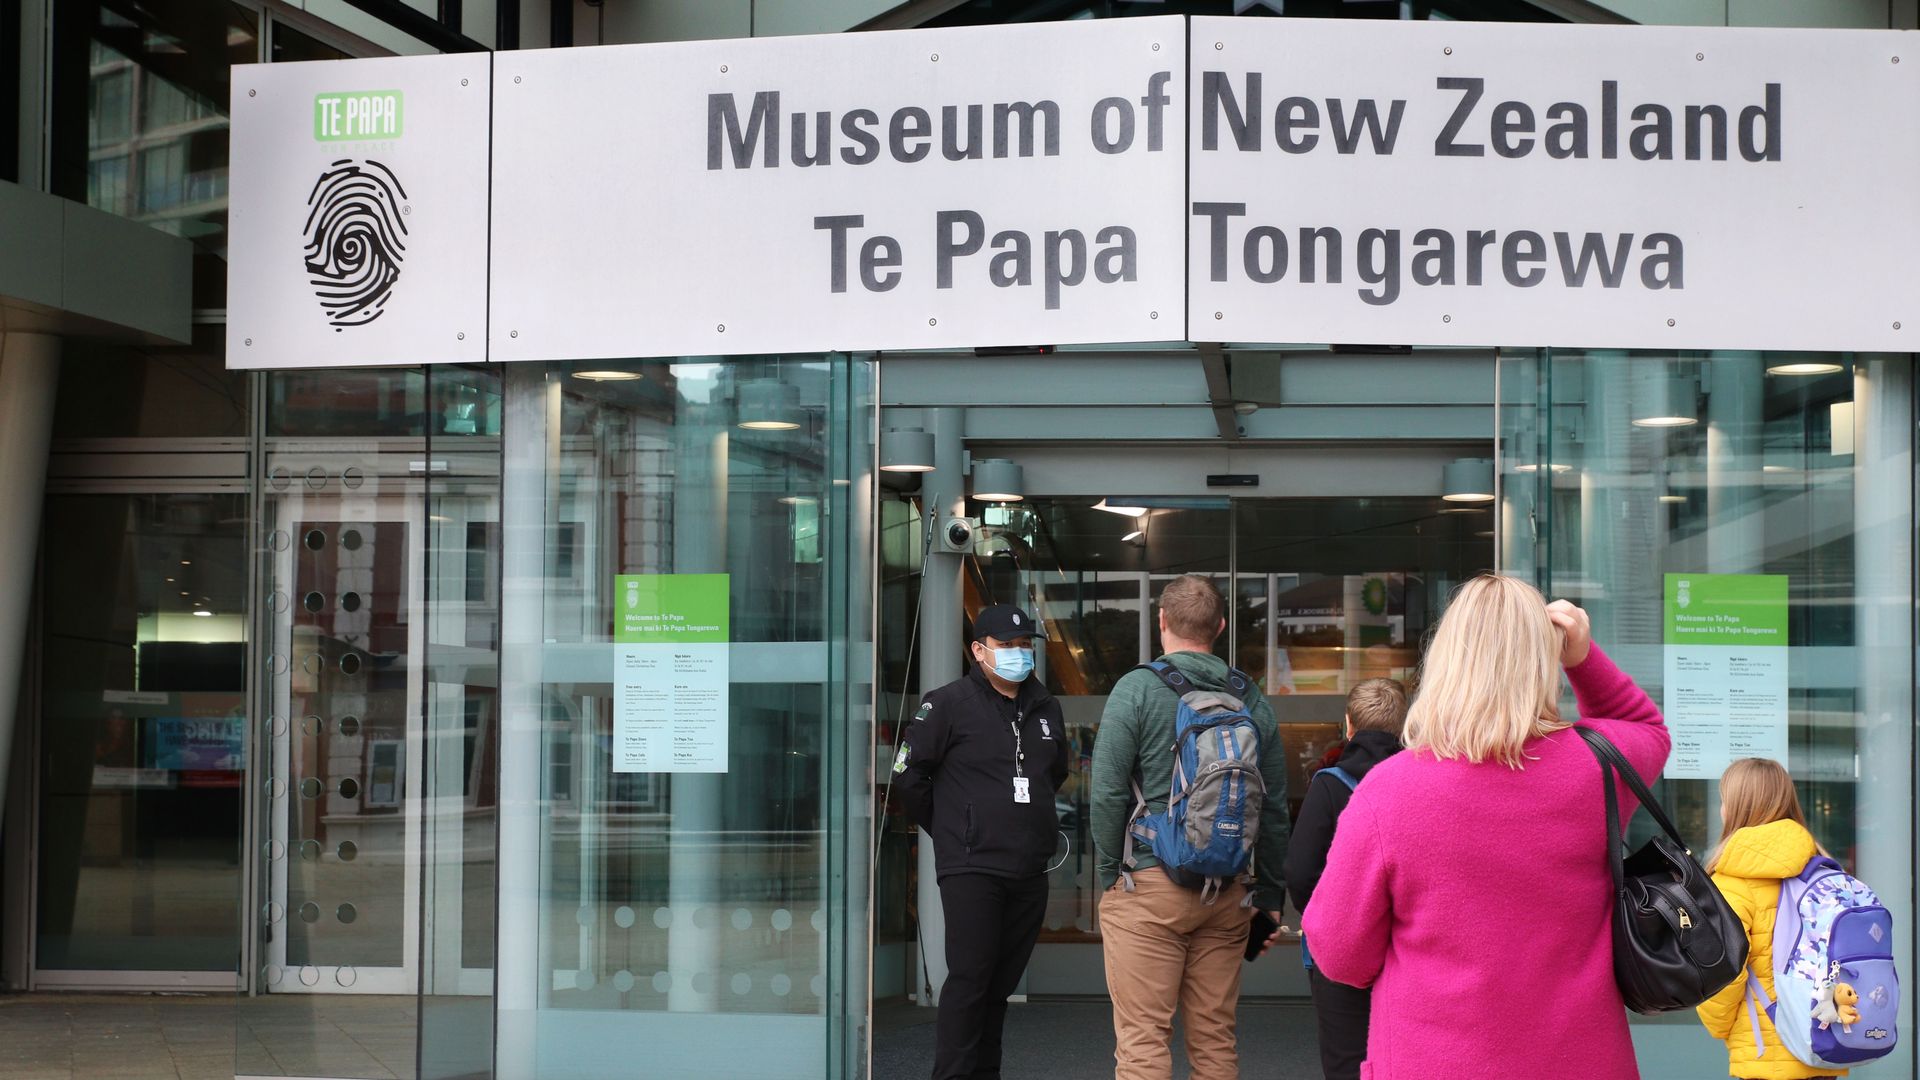 A security guard in a medical face mask turns away visitors to the Te Papa National Museum, where there was a Covid-19 exposure site, on June 23, 2021 in Wellington, New Zealand.